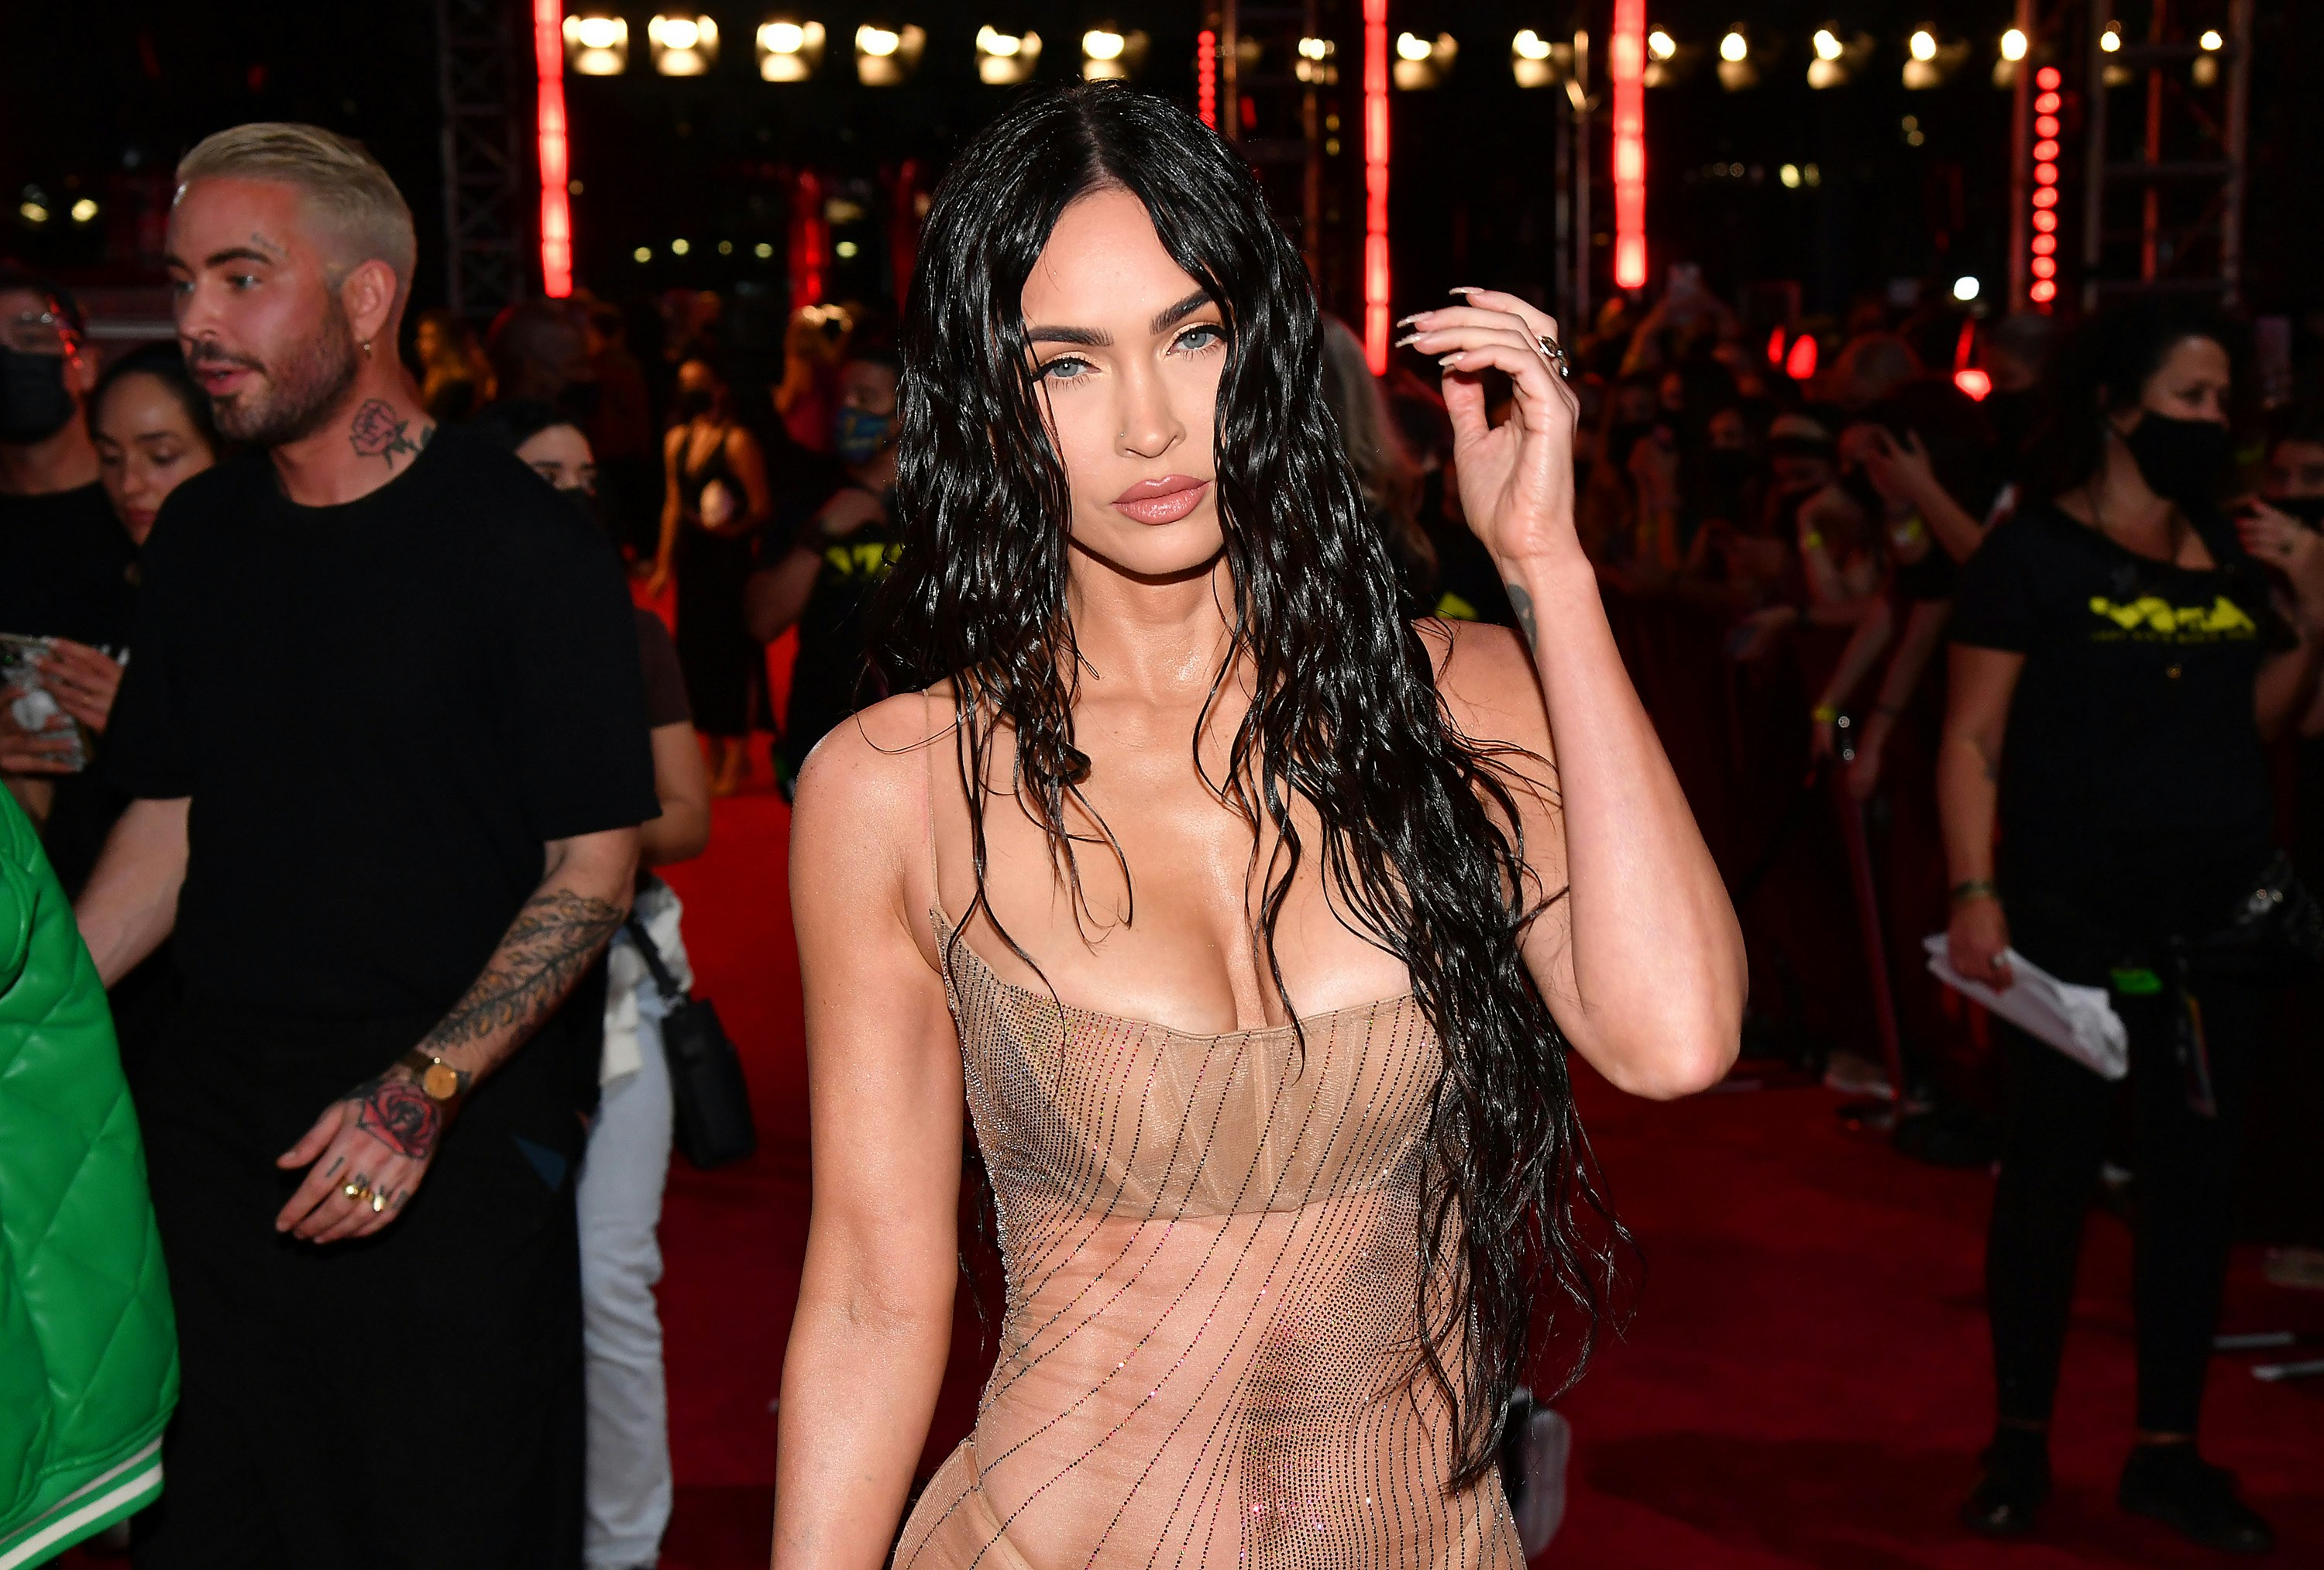 The Best Red Carpet Looks At The VMAs